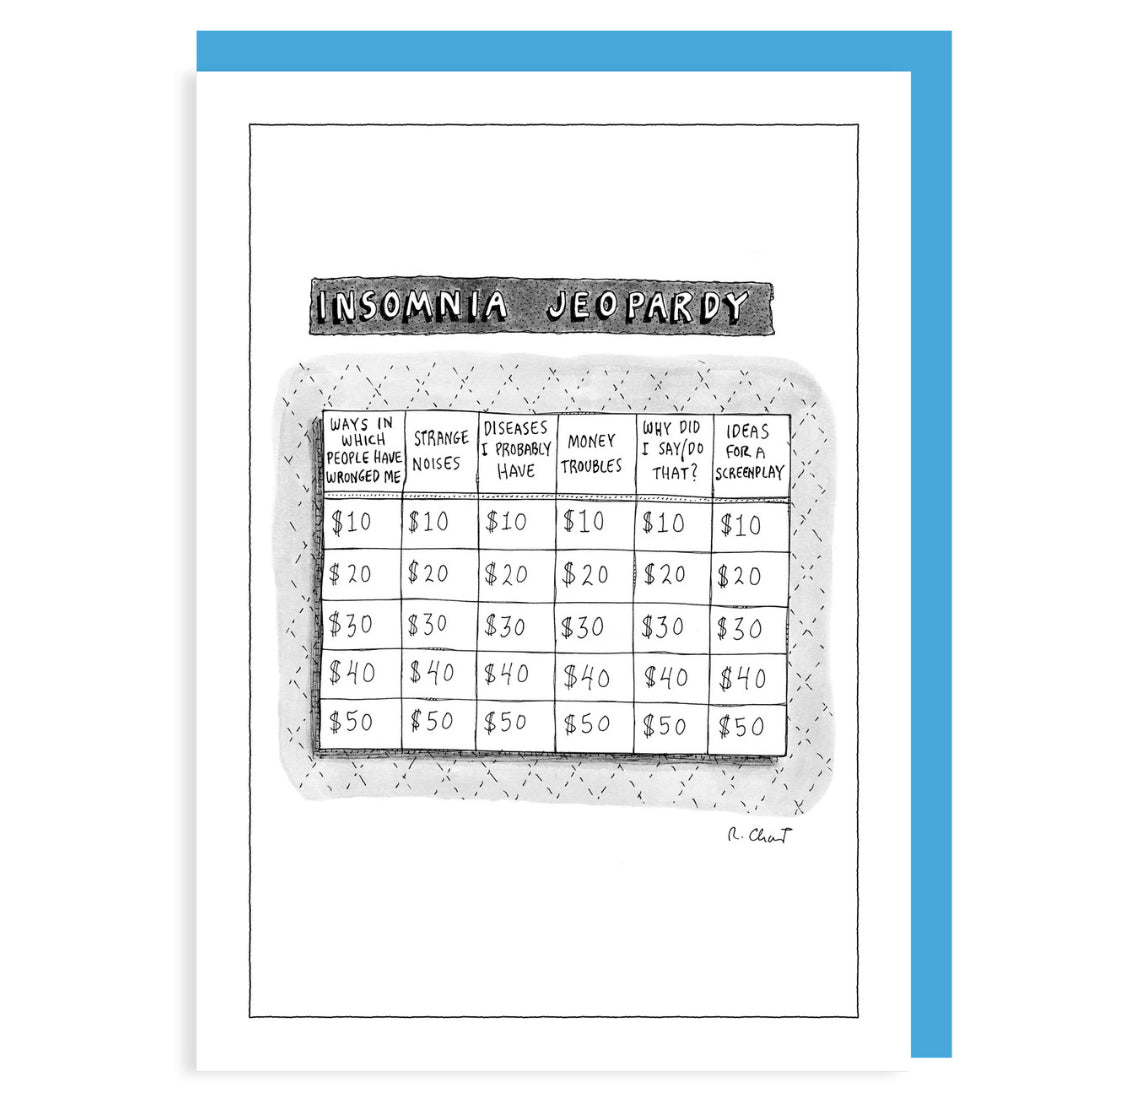 New Yorker Note Card -  Insomnia Jeopardy